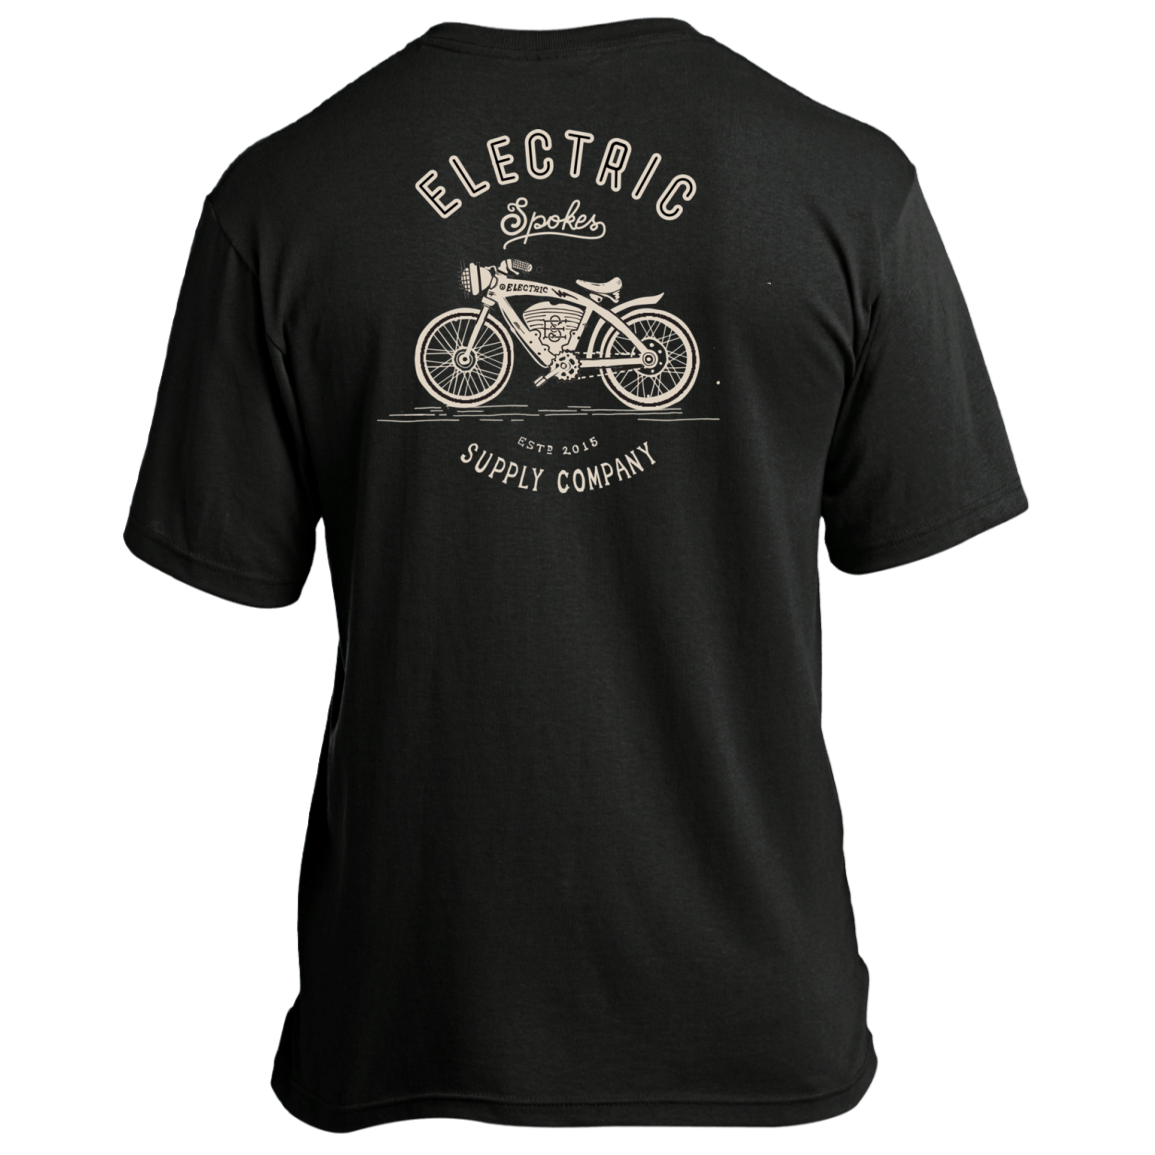 All Apparel Collection-Voltaire Cycles of Central Oregon